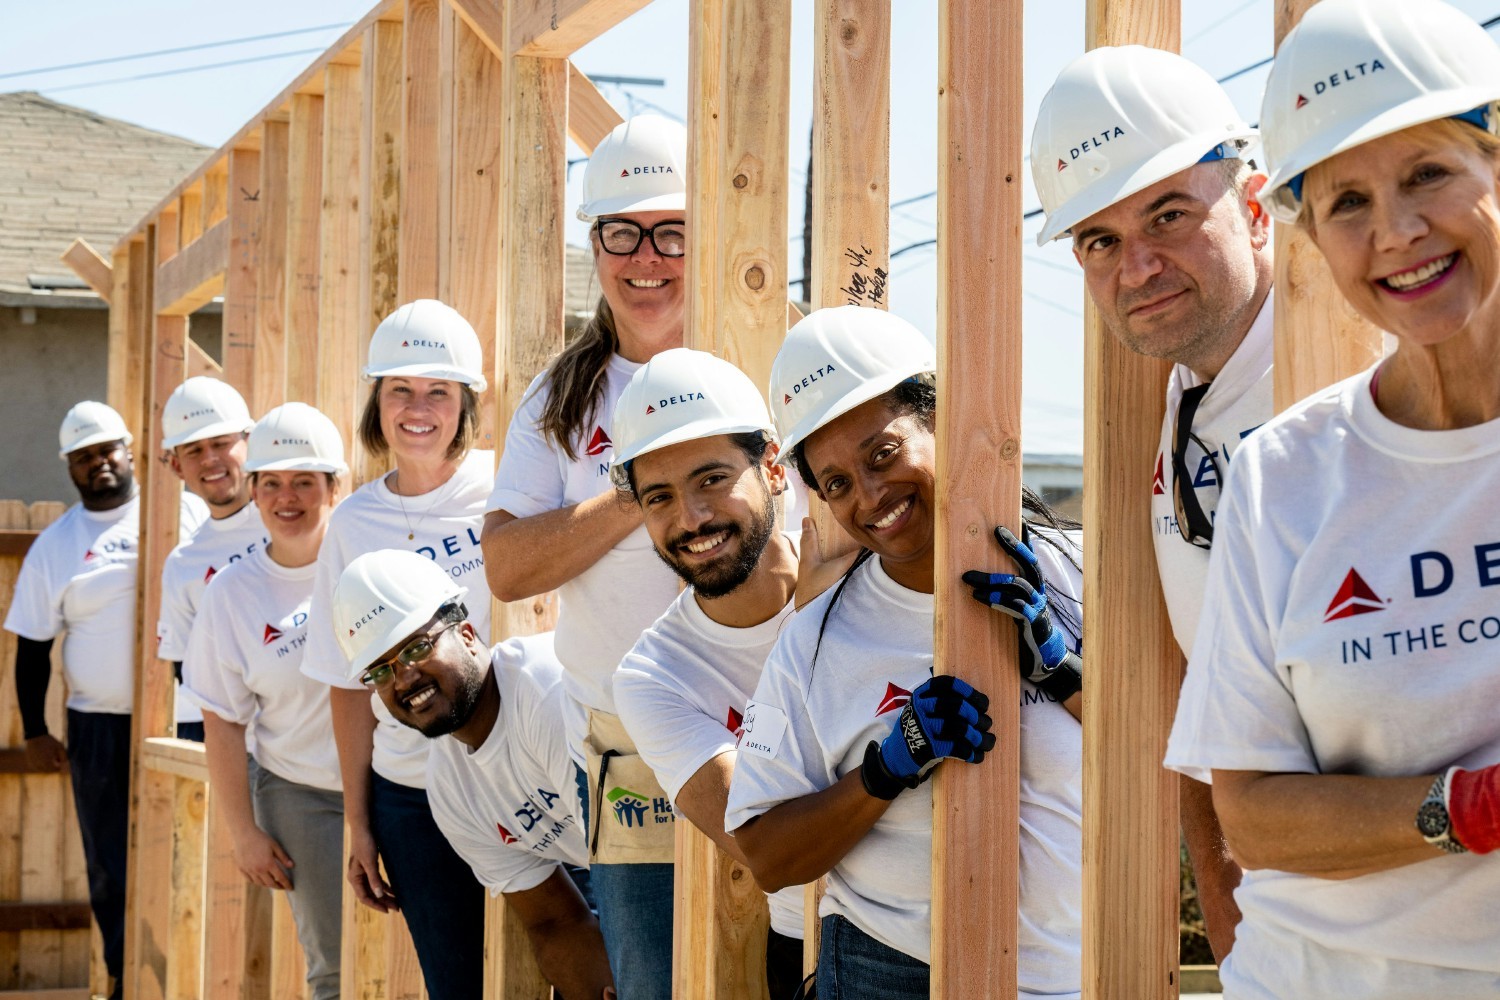 Employees volunteer their time and talent with Habitat for Humanity to build homes in the communities we serve.